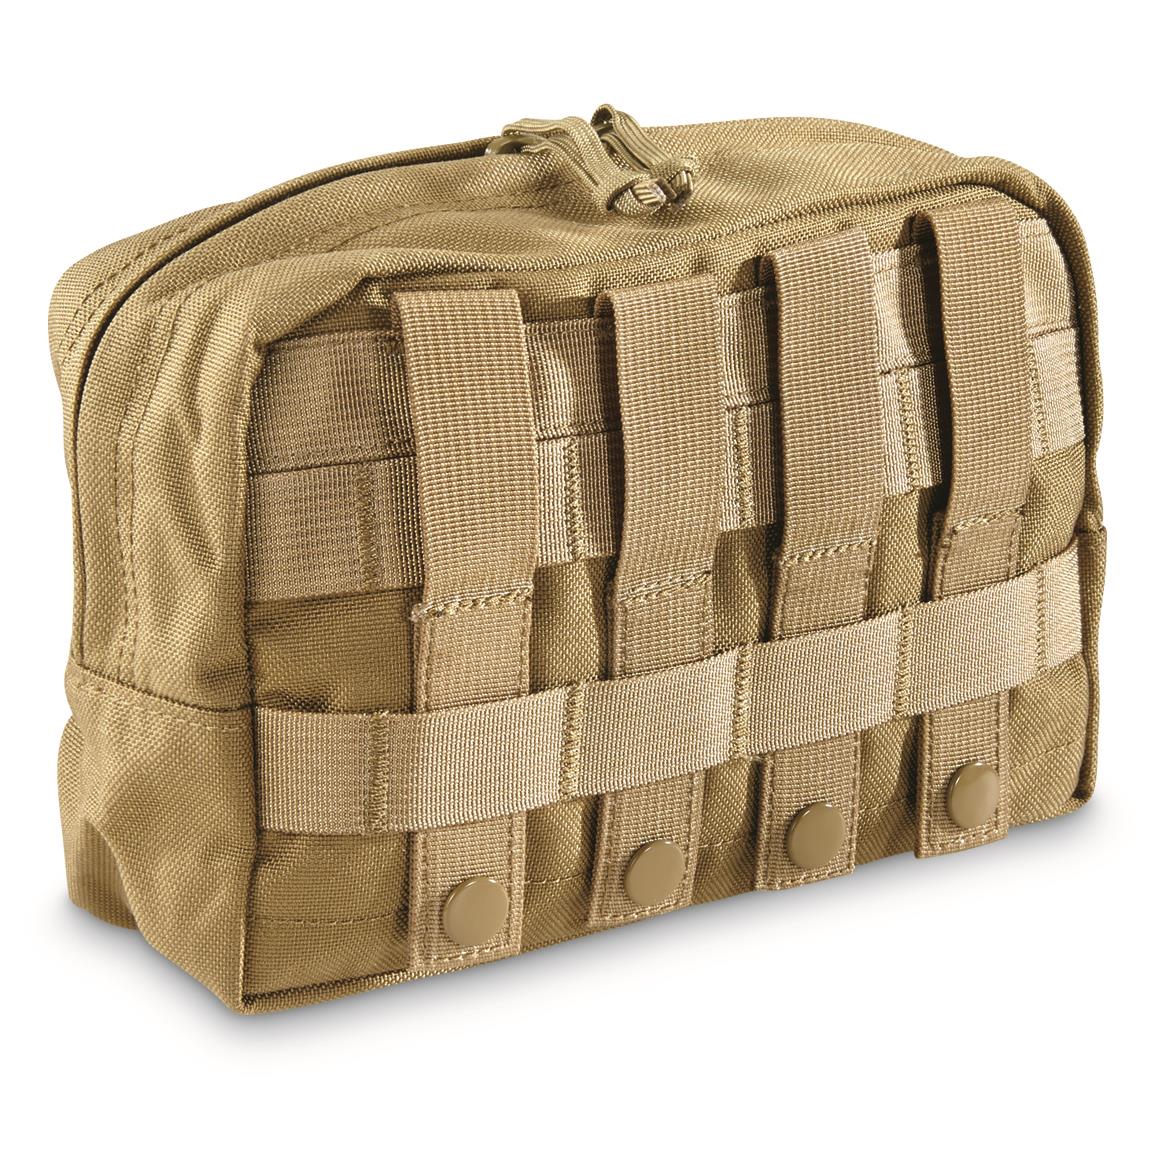 U.S. Military Surplus LBT MOLLE Utility Pouch, XL, New - 703084, Military Pouches at Sportsman&#39;s ...